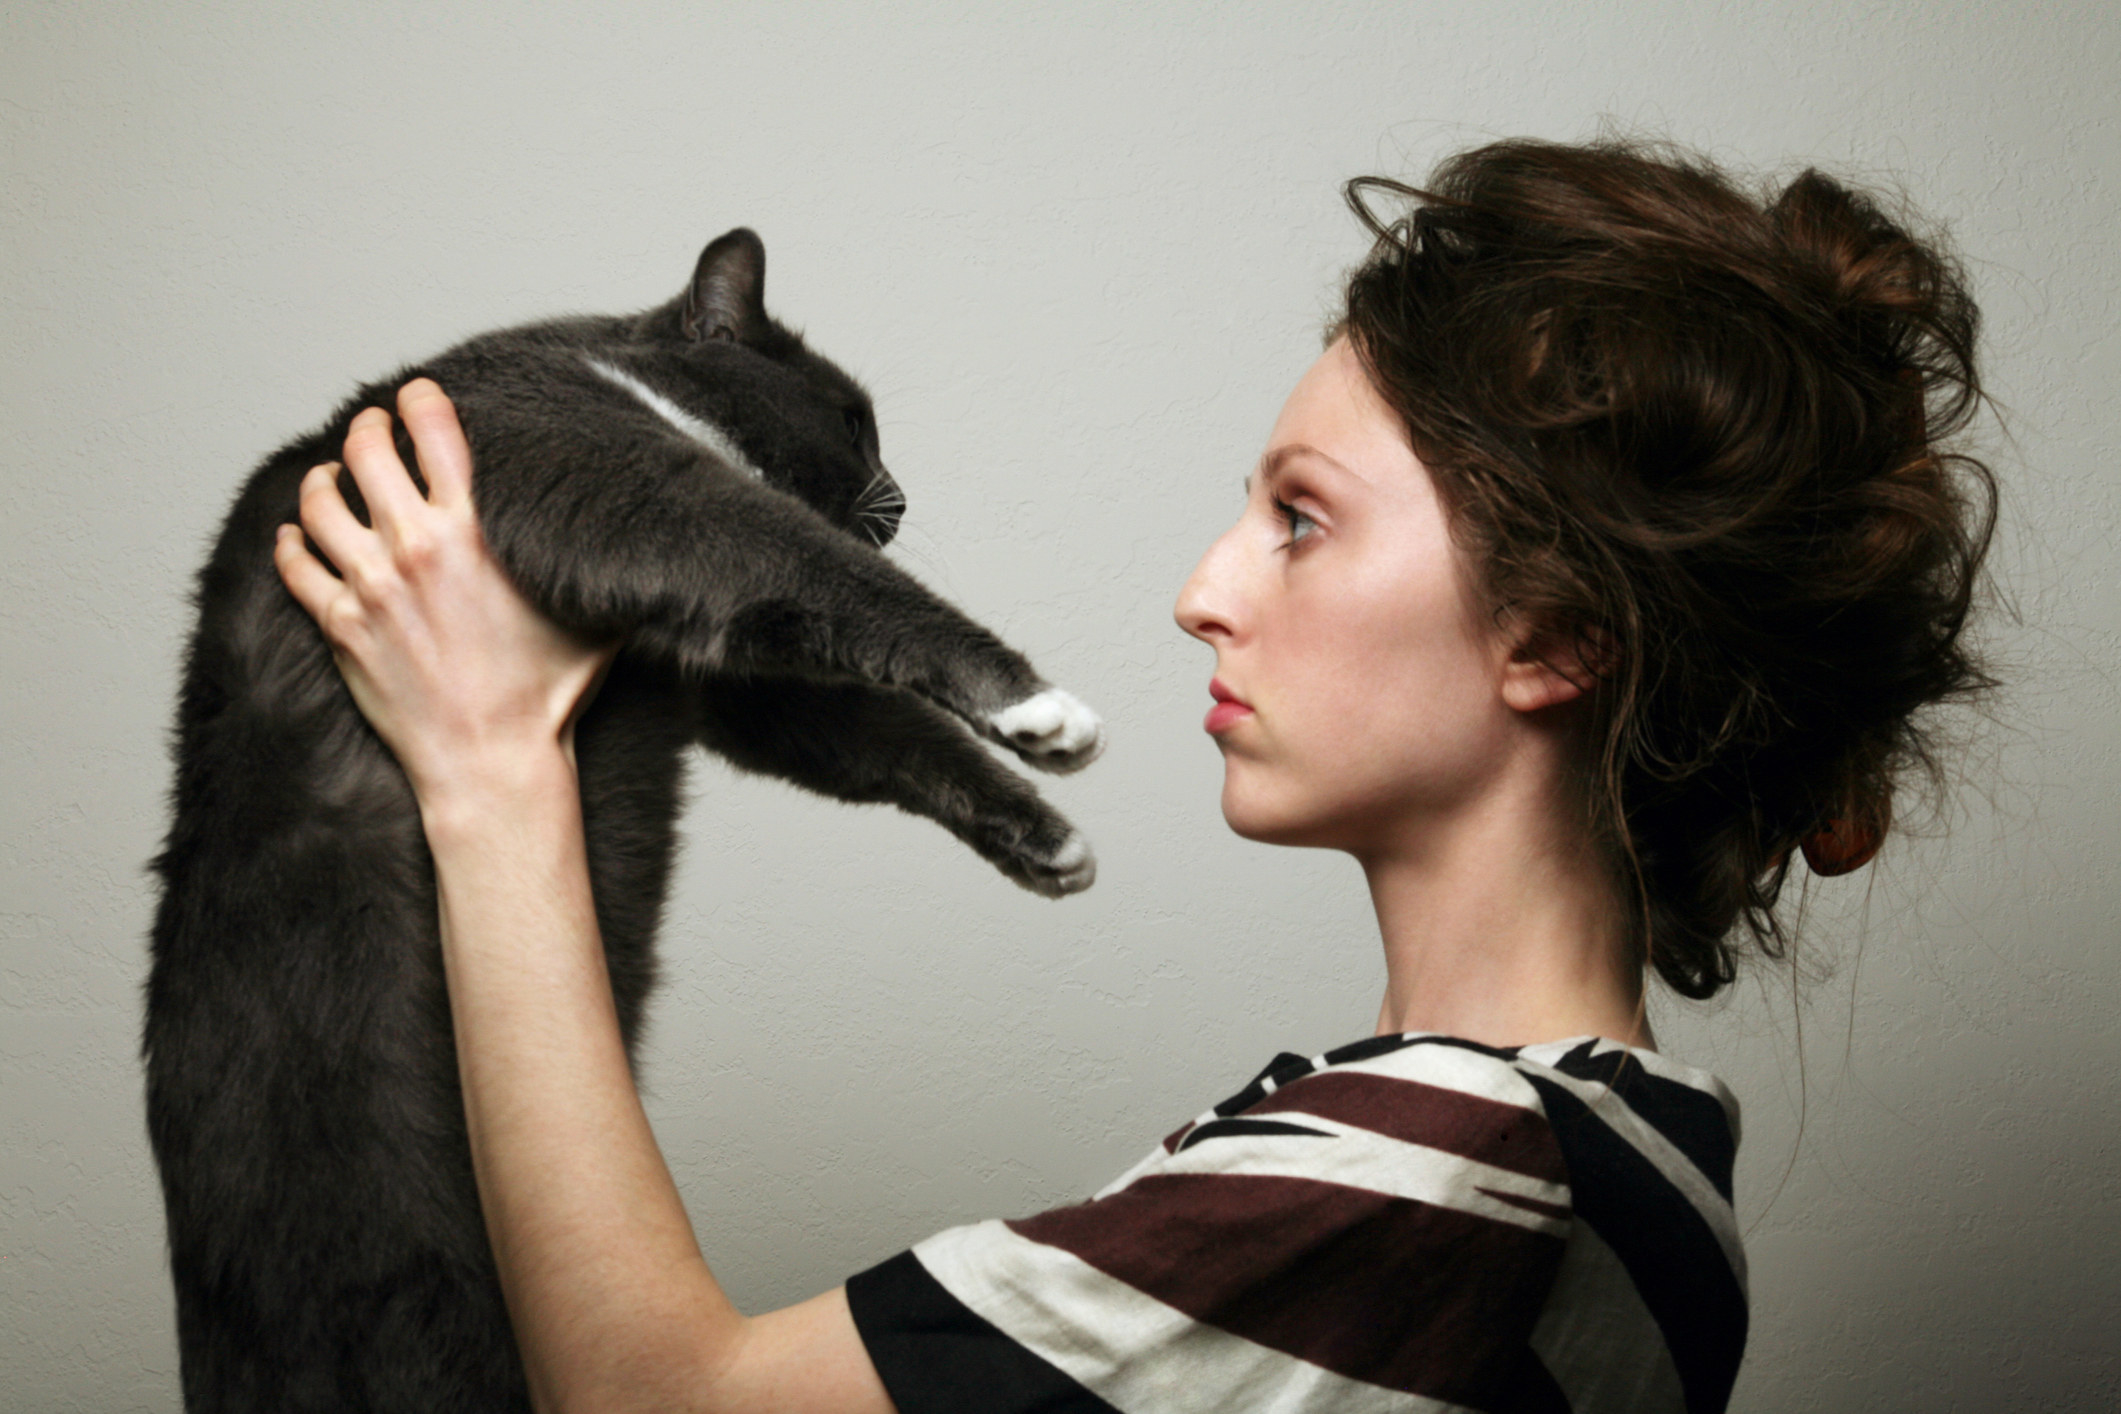 A woman holding a cat in front of her